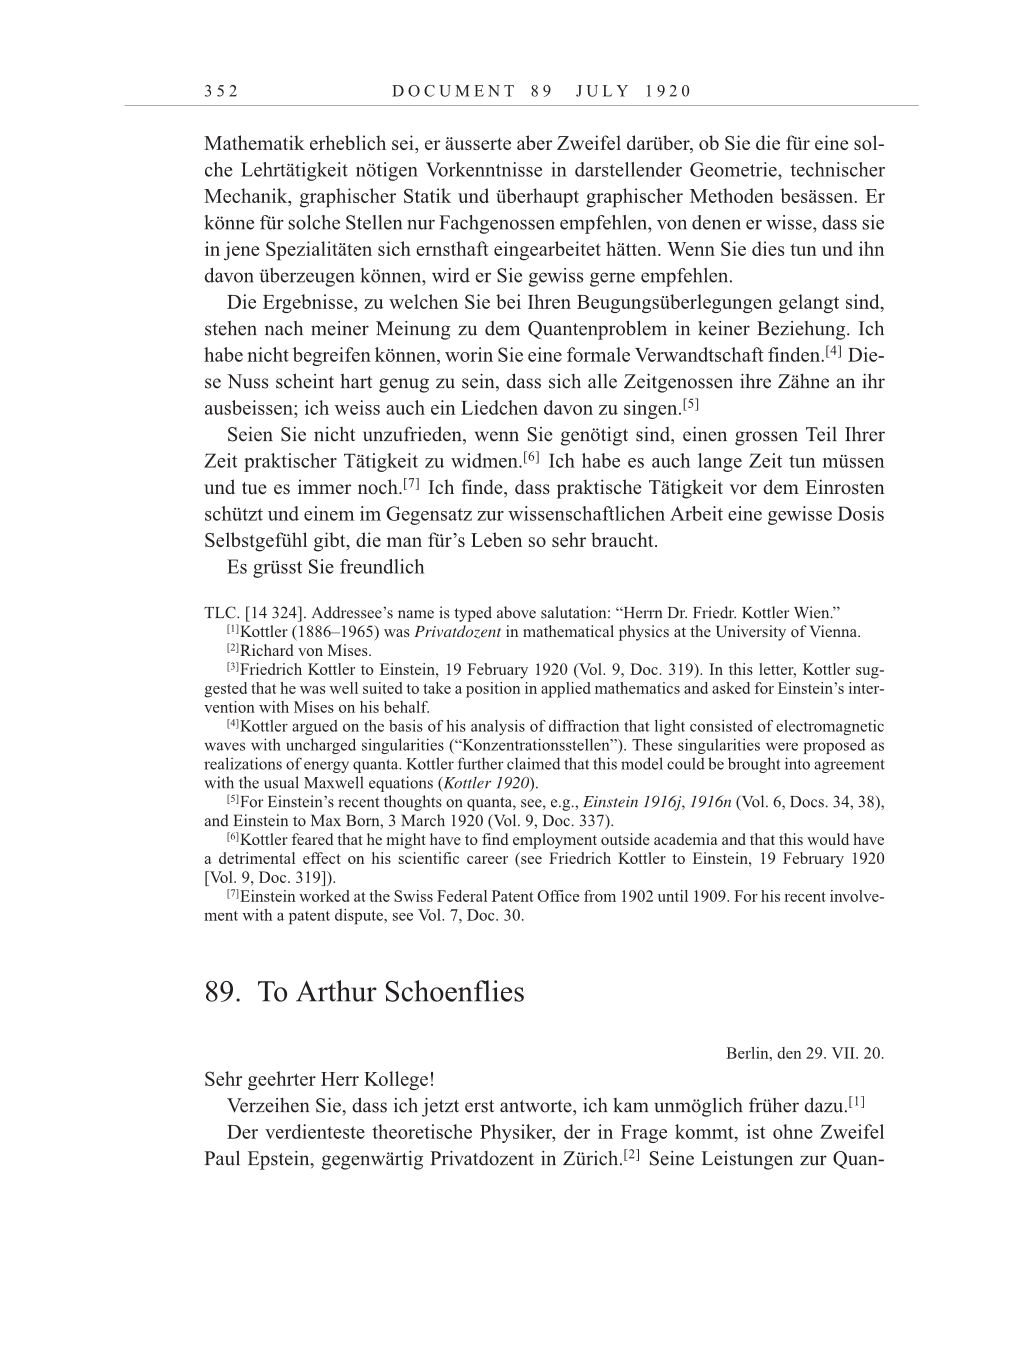 Volume 10: The Berlin Years: Correspondence May-December 1920 / Supplementary Correspondence 1909-1920 page 352